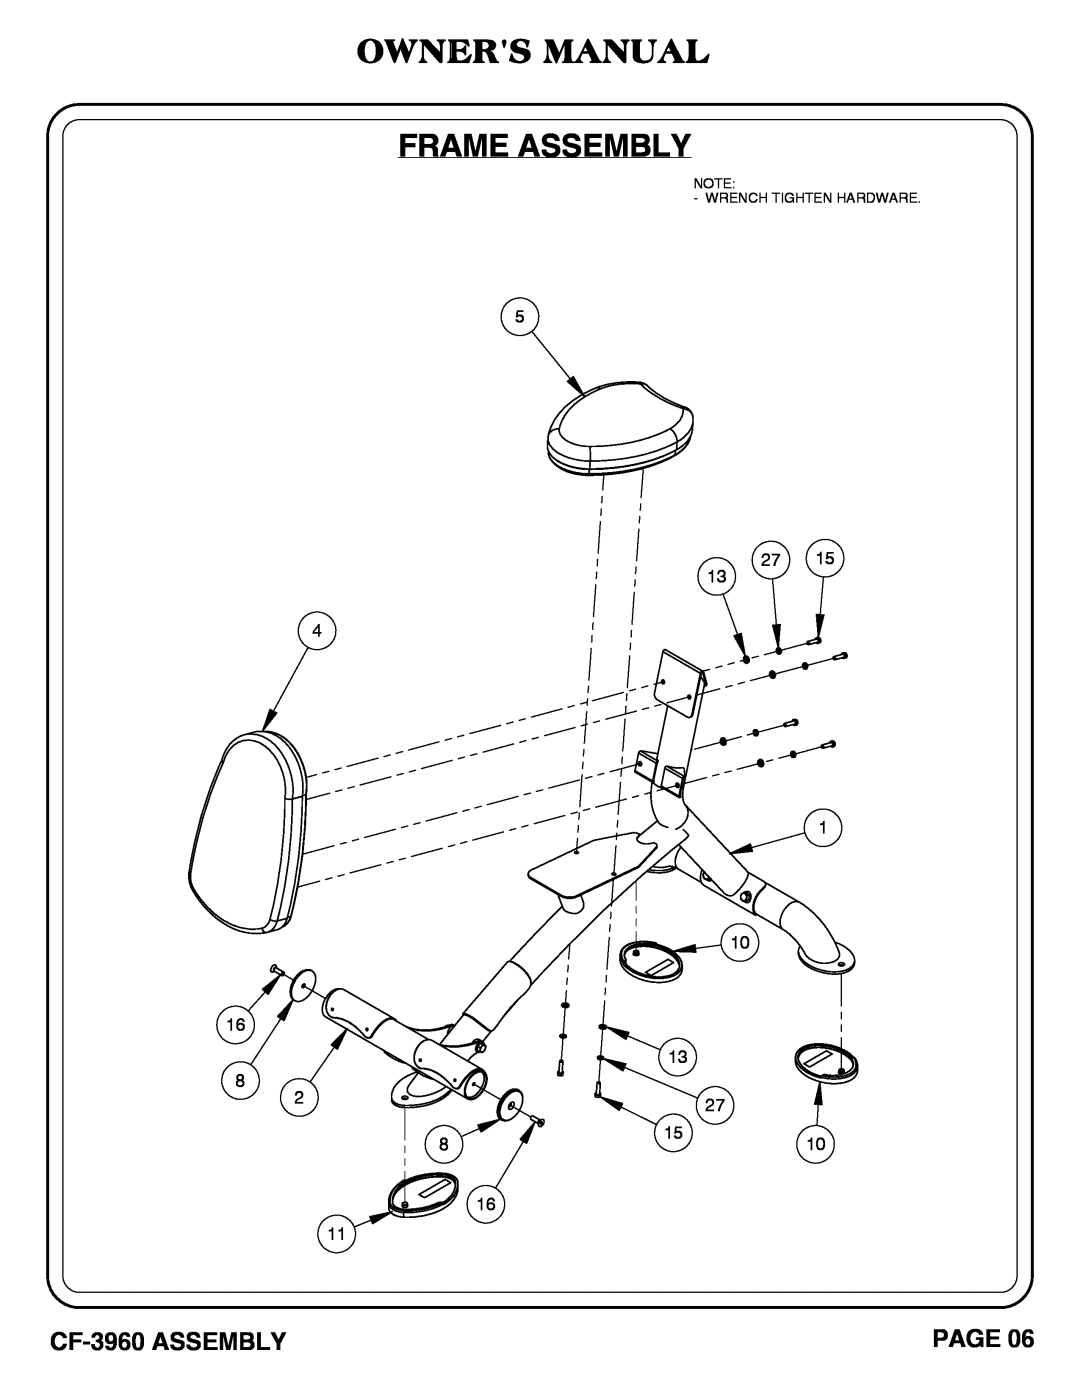 Hoist Fitness owner manual CF-3960 ASSEMBLY, Page 